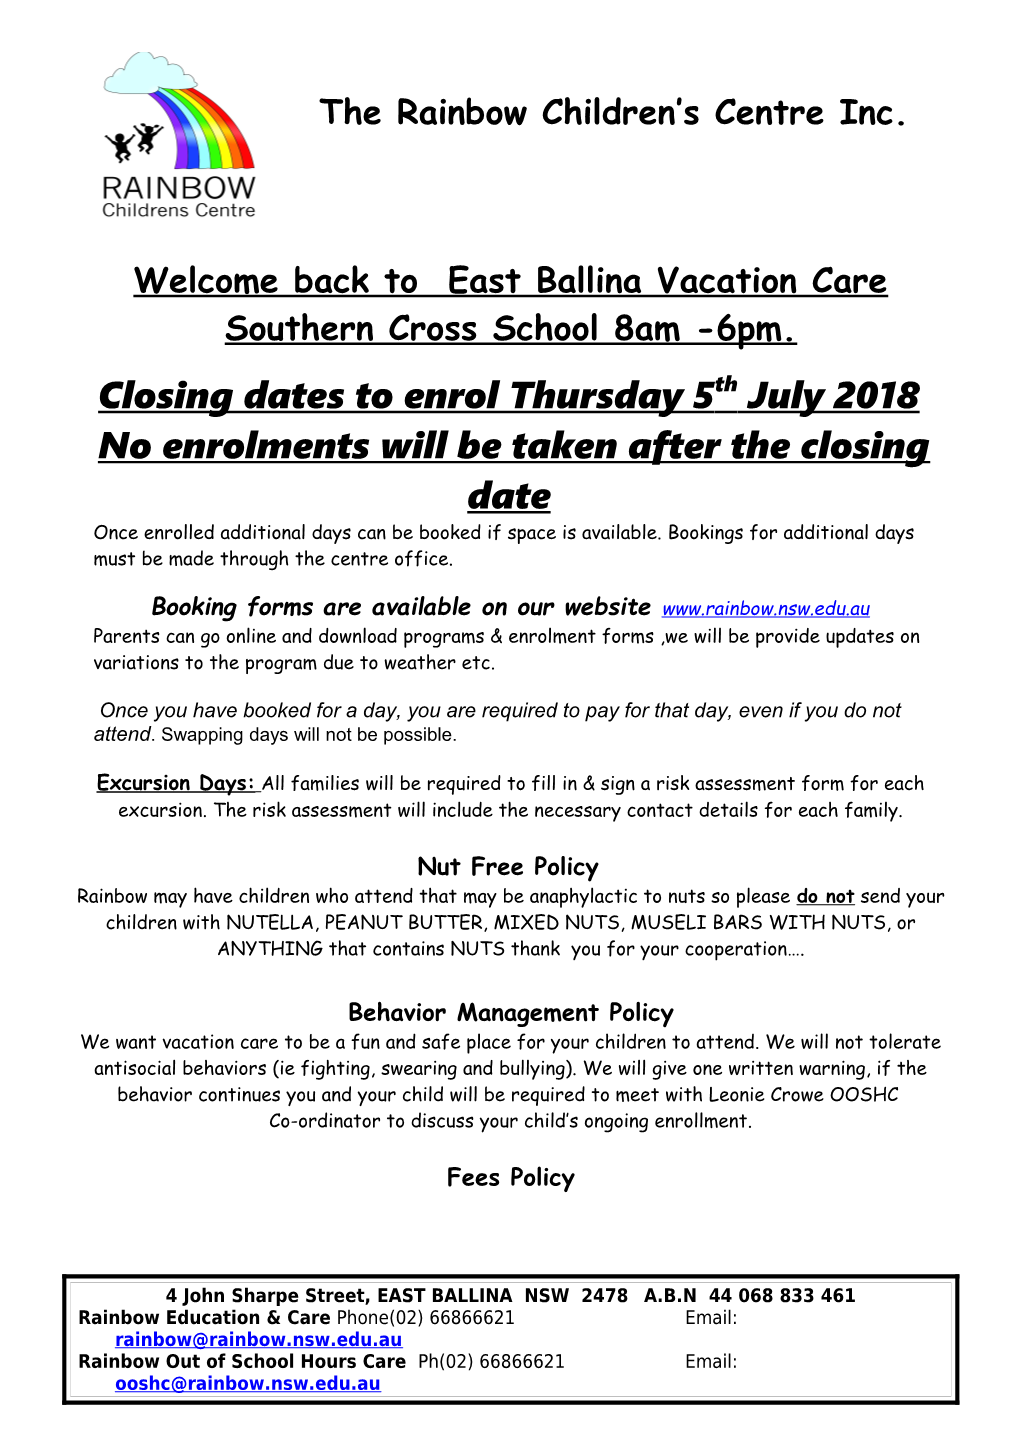 Welcome Back to East Ballina Vacation Care